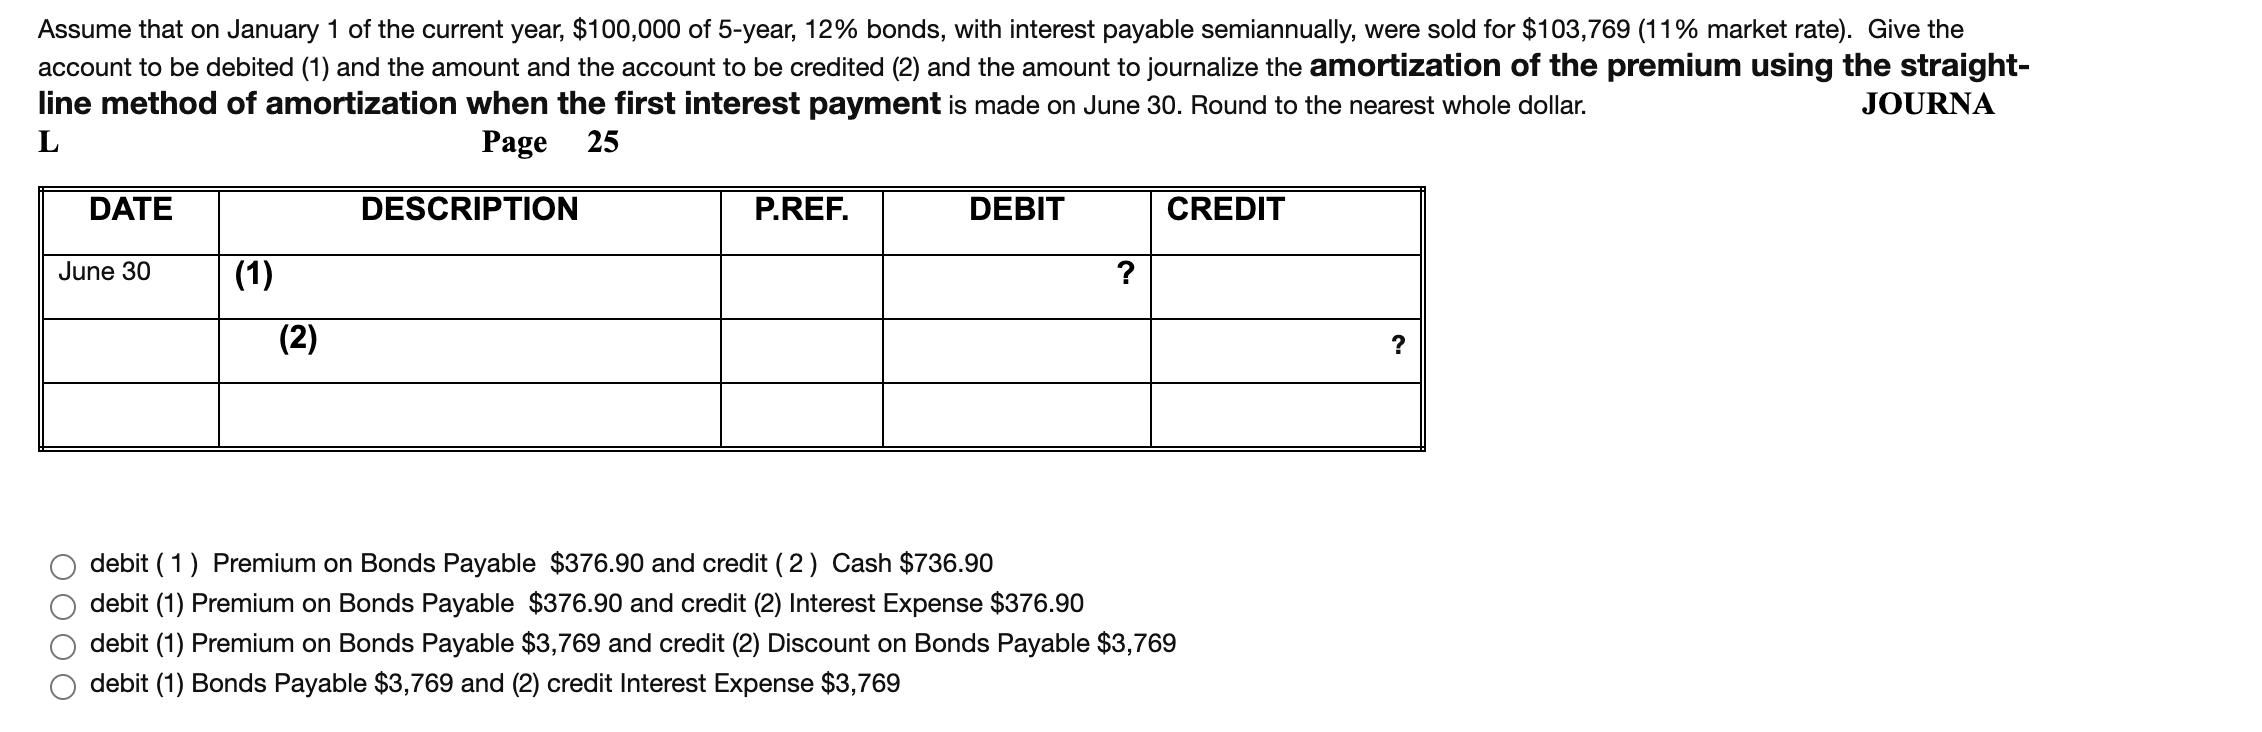 Assume that on January 1 of the current year, $100,000 of 5-year, 12% bonds, with interest payable semiannually, were sold for $103,769 (11% market rate). Give the
account to be debited (1) and the amount and the account to be credited (2) and the amount to journalize the amortization of the premium using the straight-
line method of amortization when the first interest payment is made on June 30. Round to the nearest whole dollar.
JOURNA
L
Page 25
DATE
DESCRIPTION
P.REF.
DEBIT
CREDIT
June 30
(1)
?
(2)
?
debit (1) Premium on Bonds Payable $376.90 and credit (2) Cash $736.90
debit (1) Premium on Bonds Payable $376.90 and credit (2) Interest Expense $376.90
debit (1) Premium on Bonds Payable $3,769 and credit (2) Discount on Bonds Payable $3,769
debit (1) Bonds Payable $3,769 and (2) credit Interest Expense $3,769
